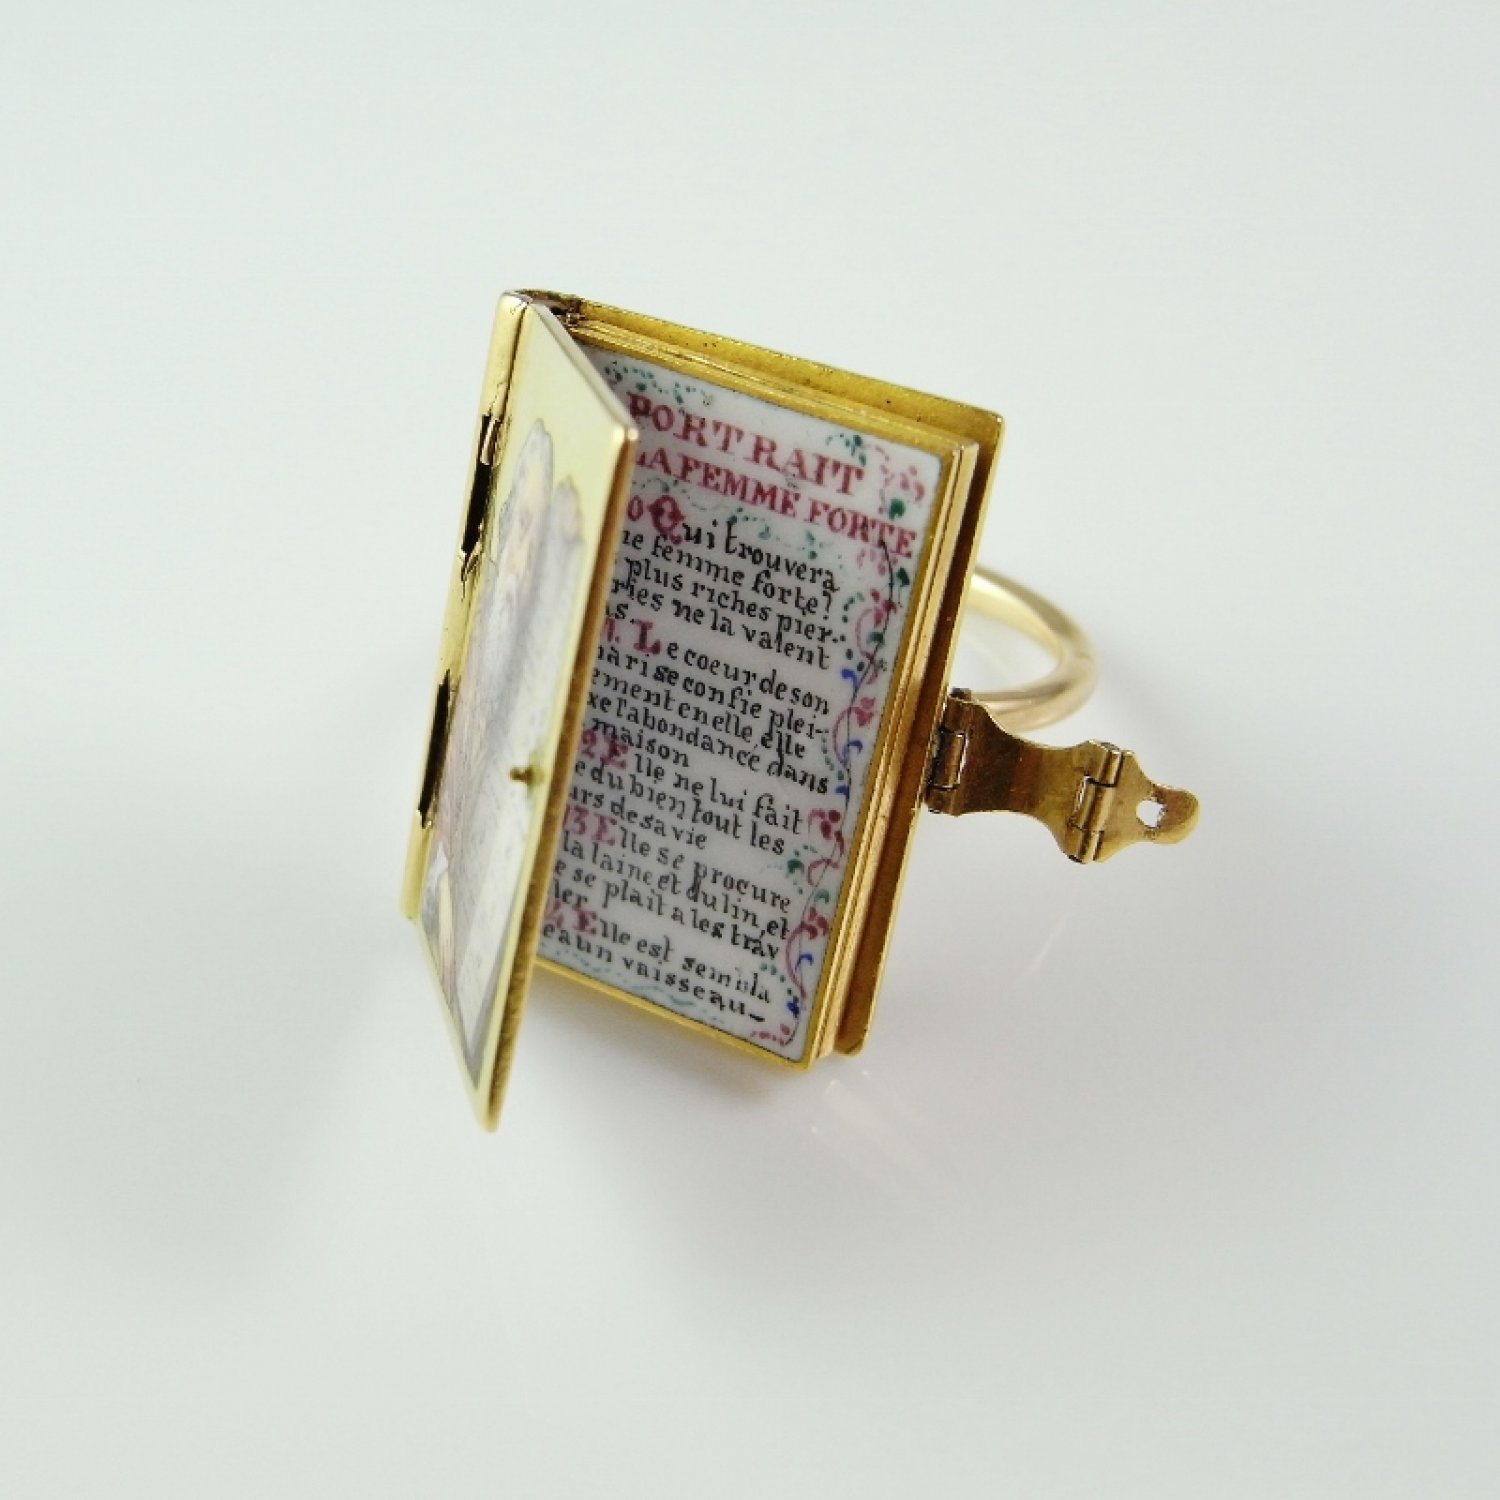 French Empire Georgian Enamel Miniature Holy Bible Ring circa 1810 in 18K Gold French Hand Made Enamel Ring Proverbs 31 Antique Wedding Band